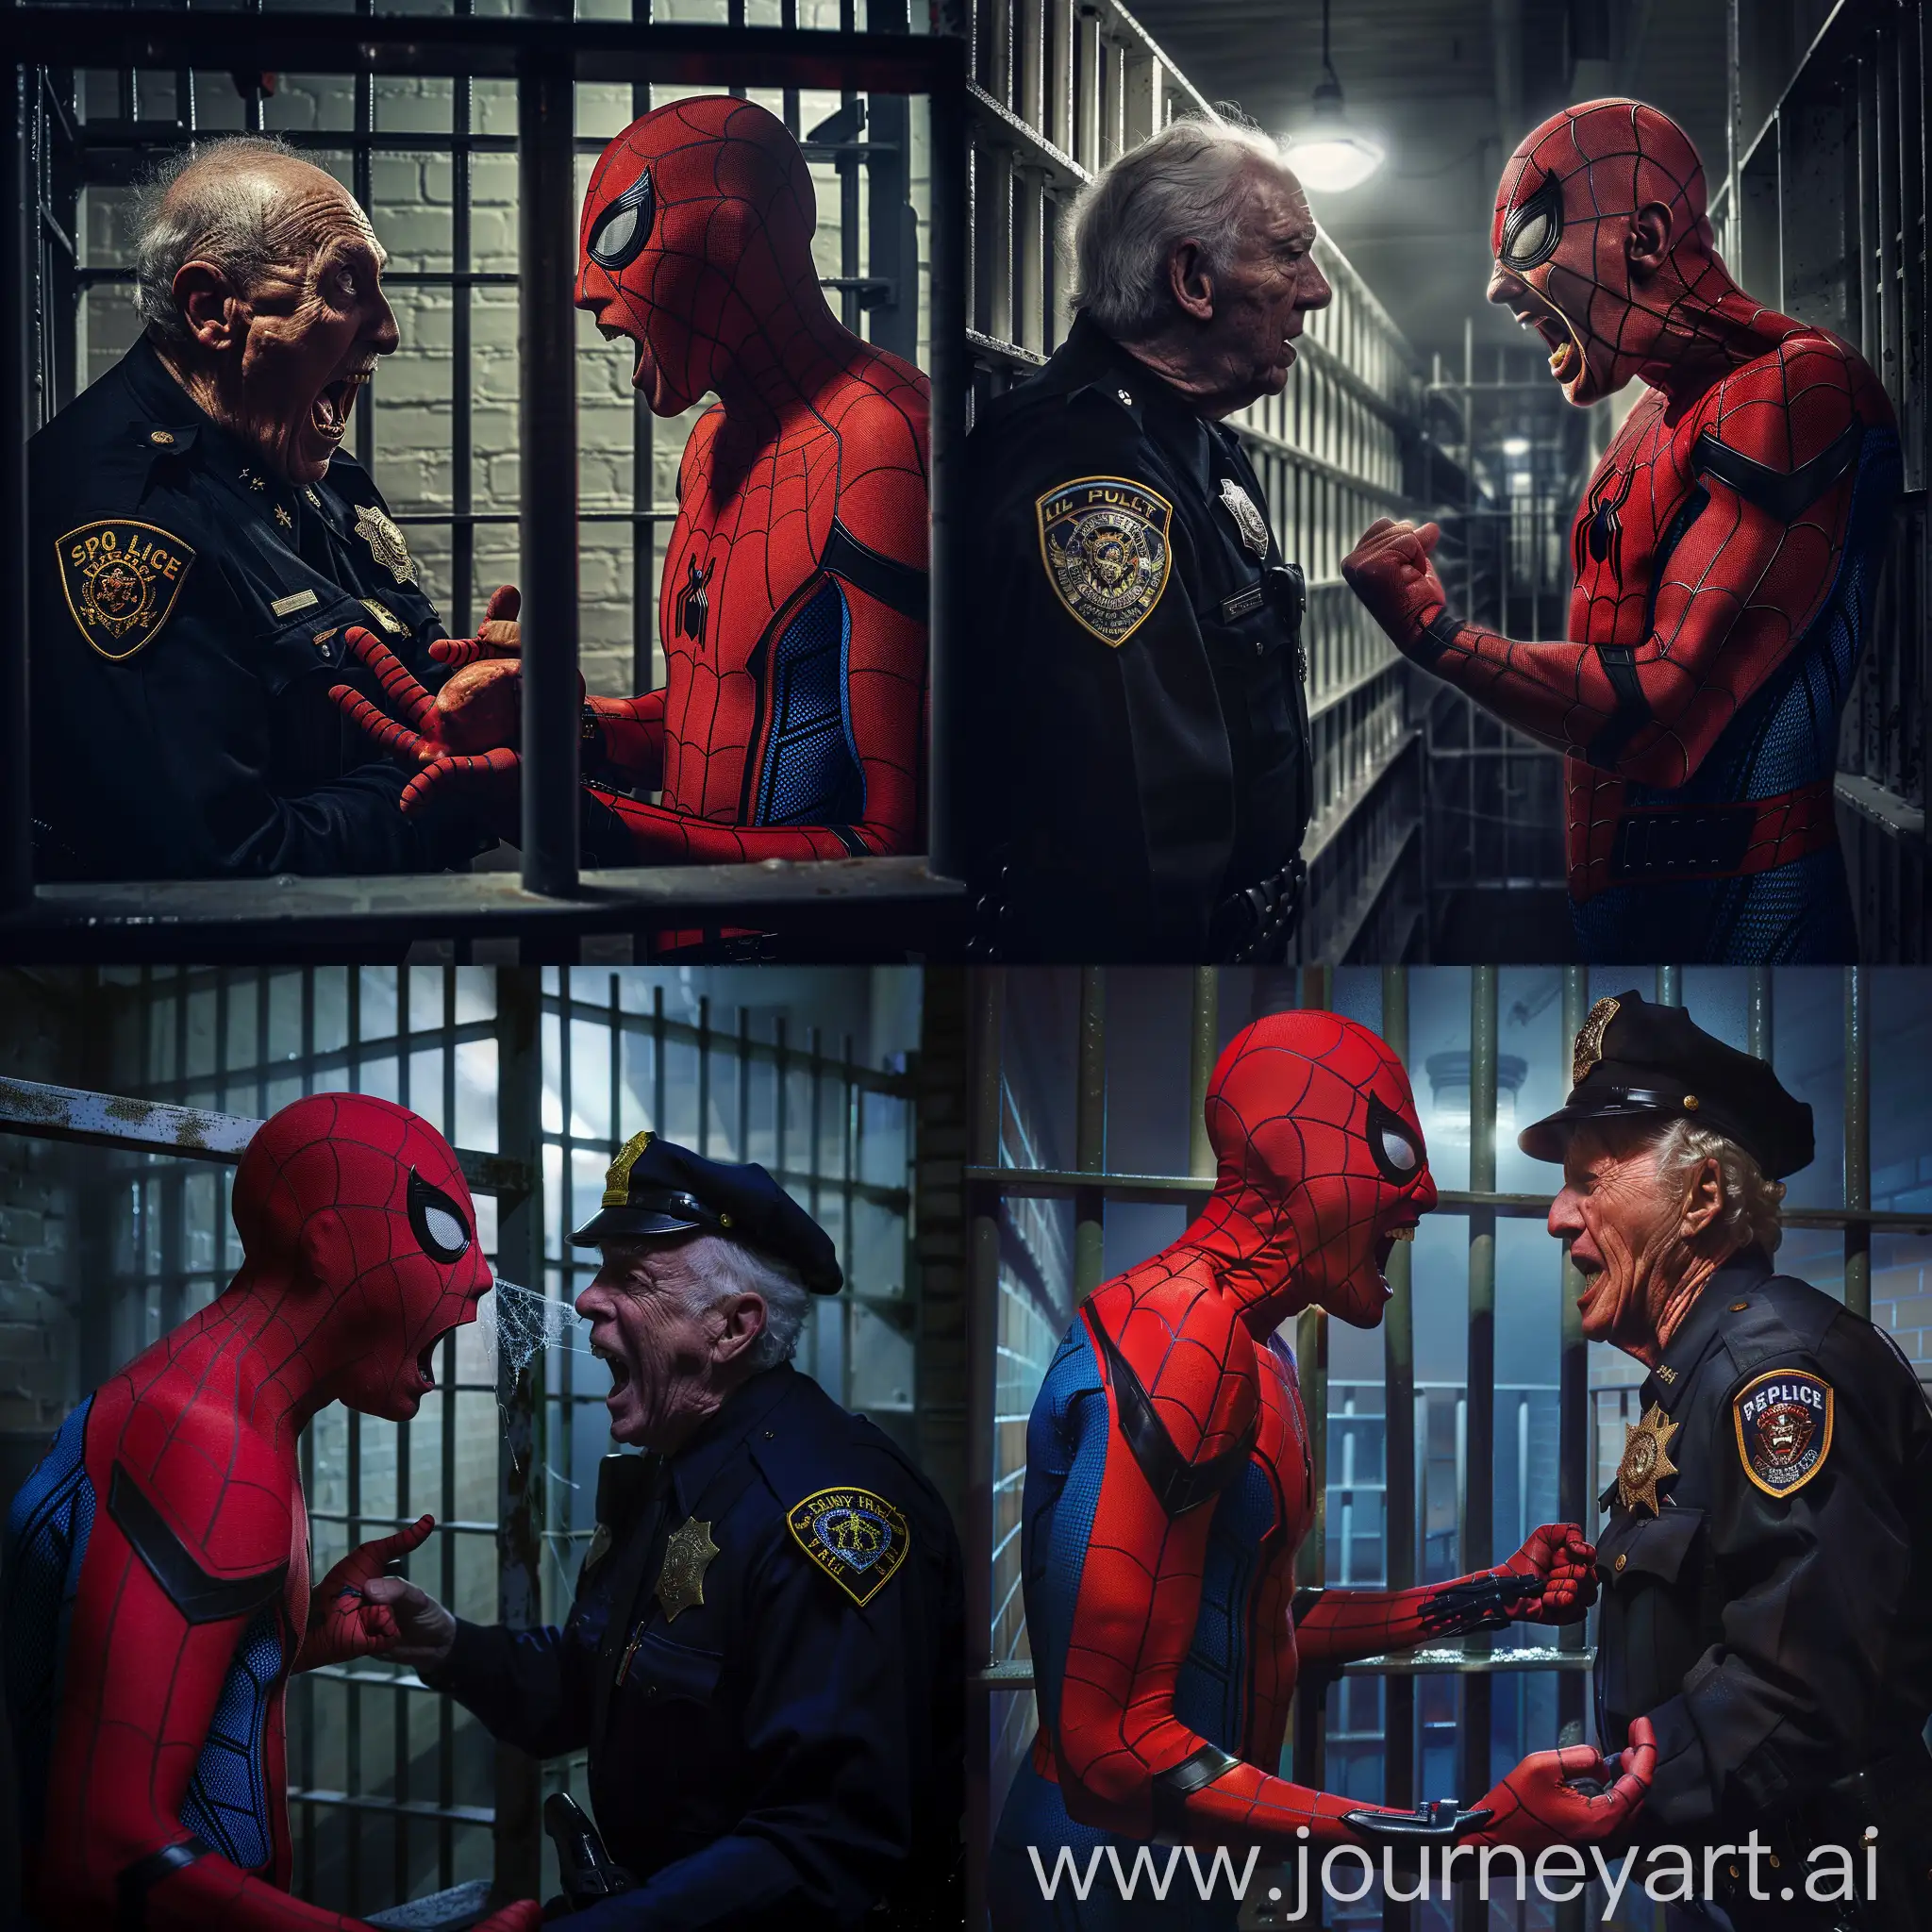 Spiderman-Confronted-by-Stern-Policeman-in-Jail-Cell-at-Night